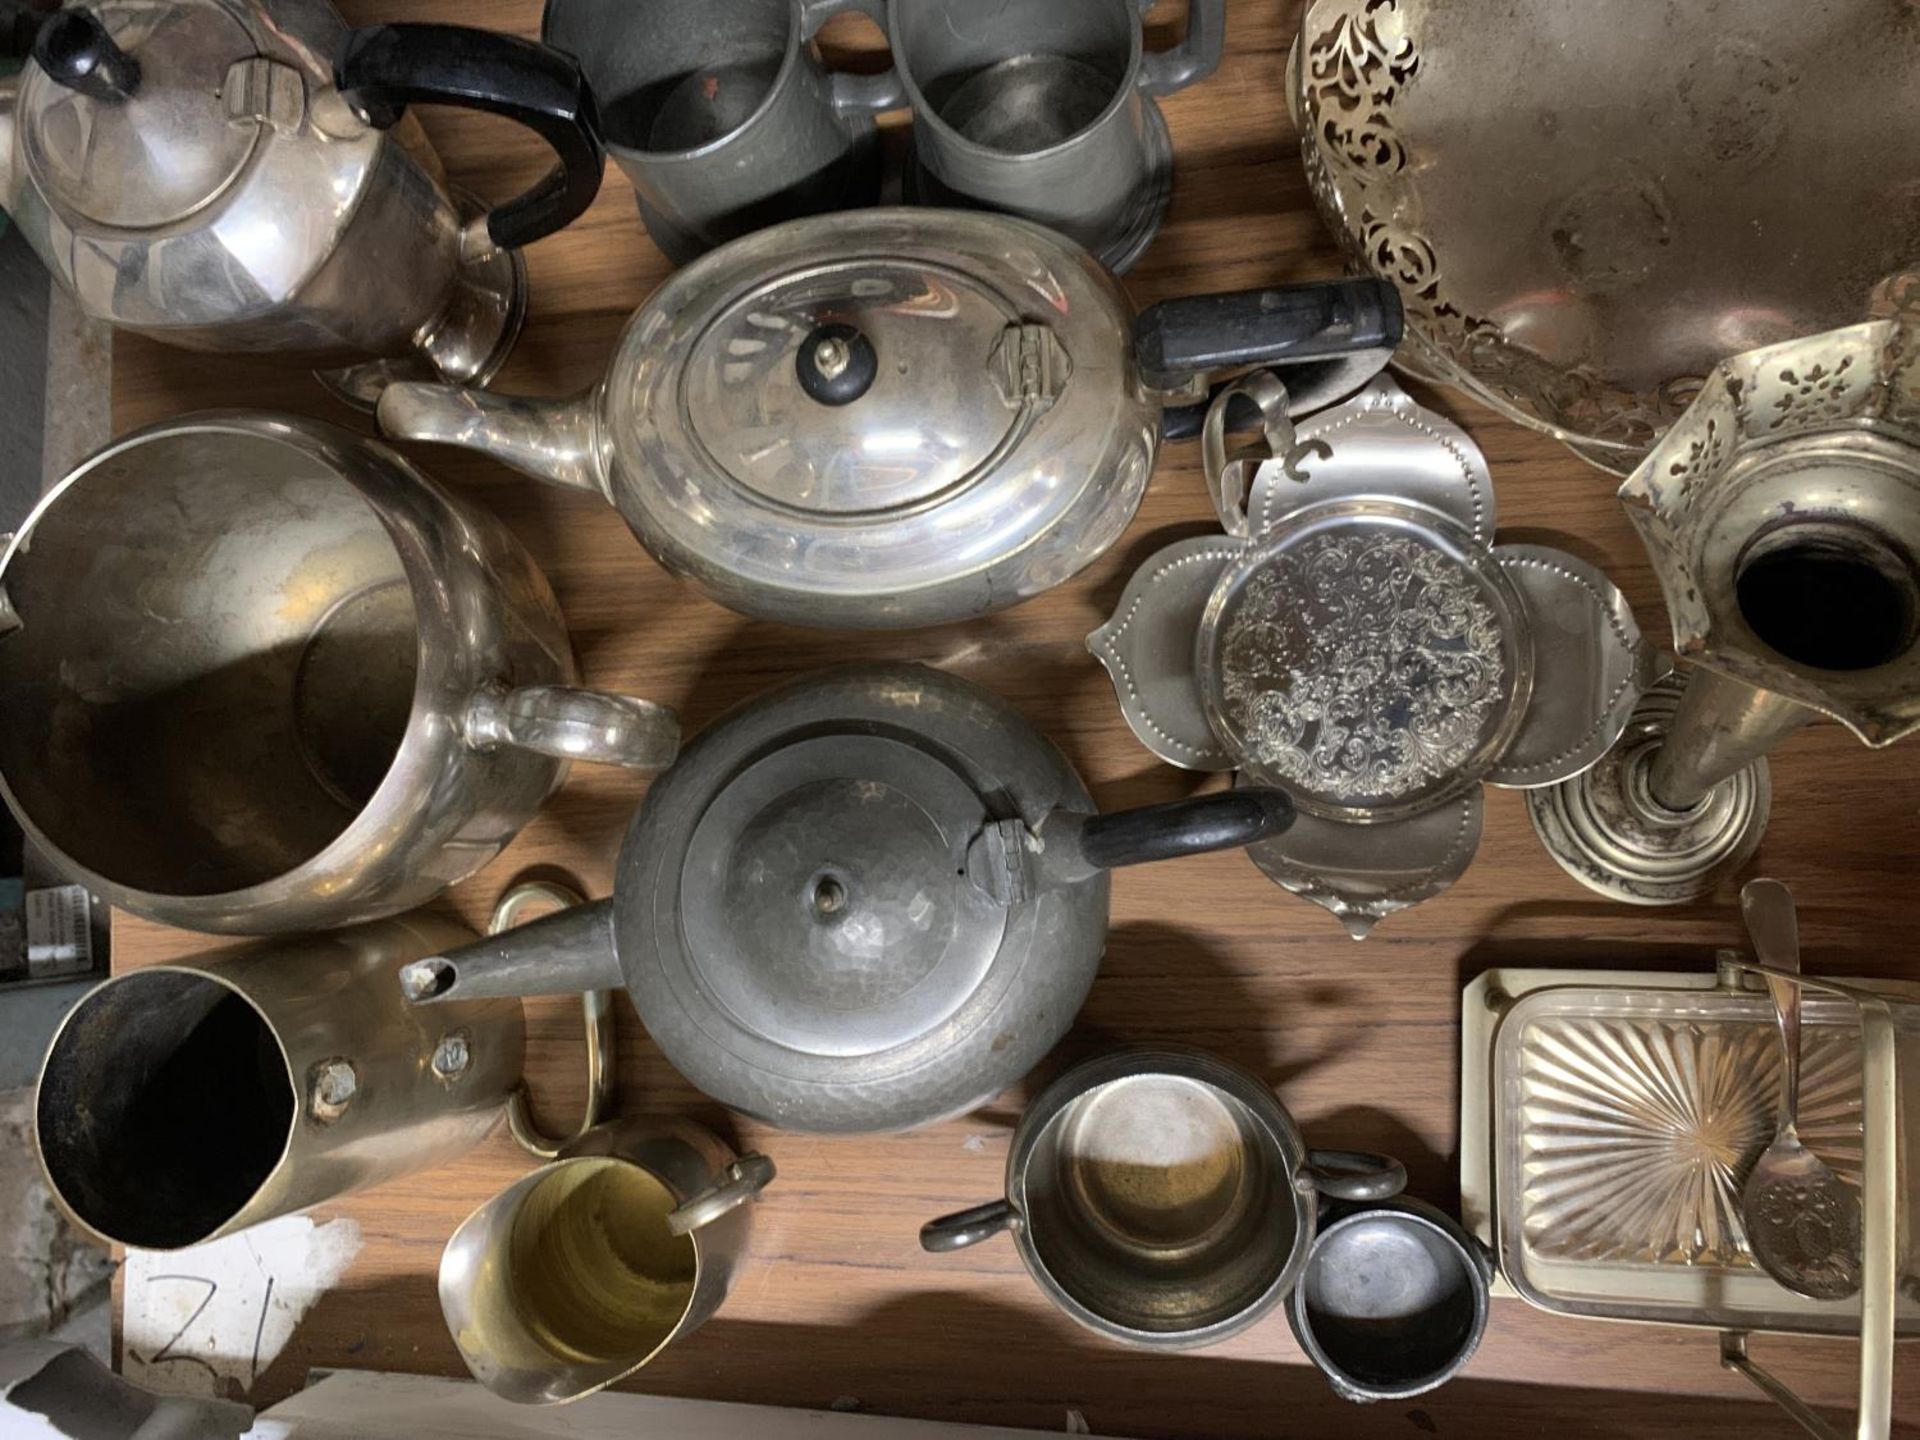 A LARGE QUANTITY OF PEWTER AND SILVER PLATED ITEMS TO INCLUDE TEAPOTS, TANKARDS, JUGS, ETC - Image 2 of 2